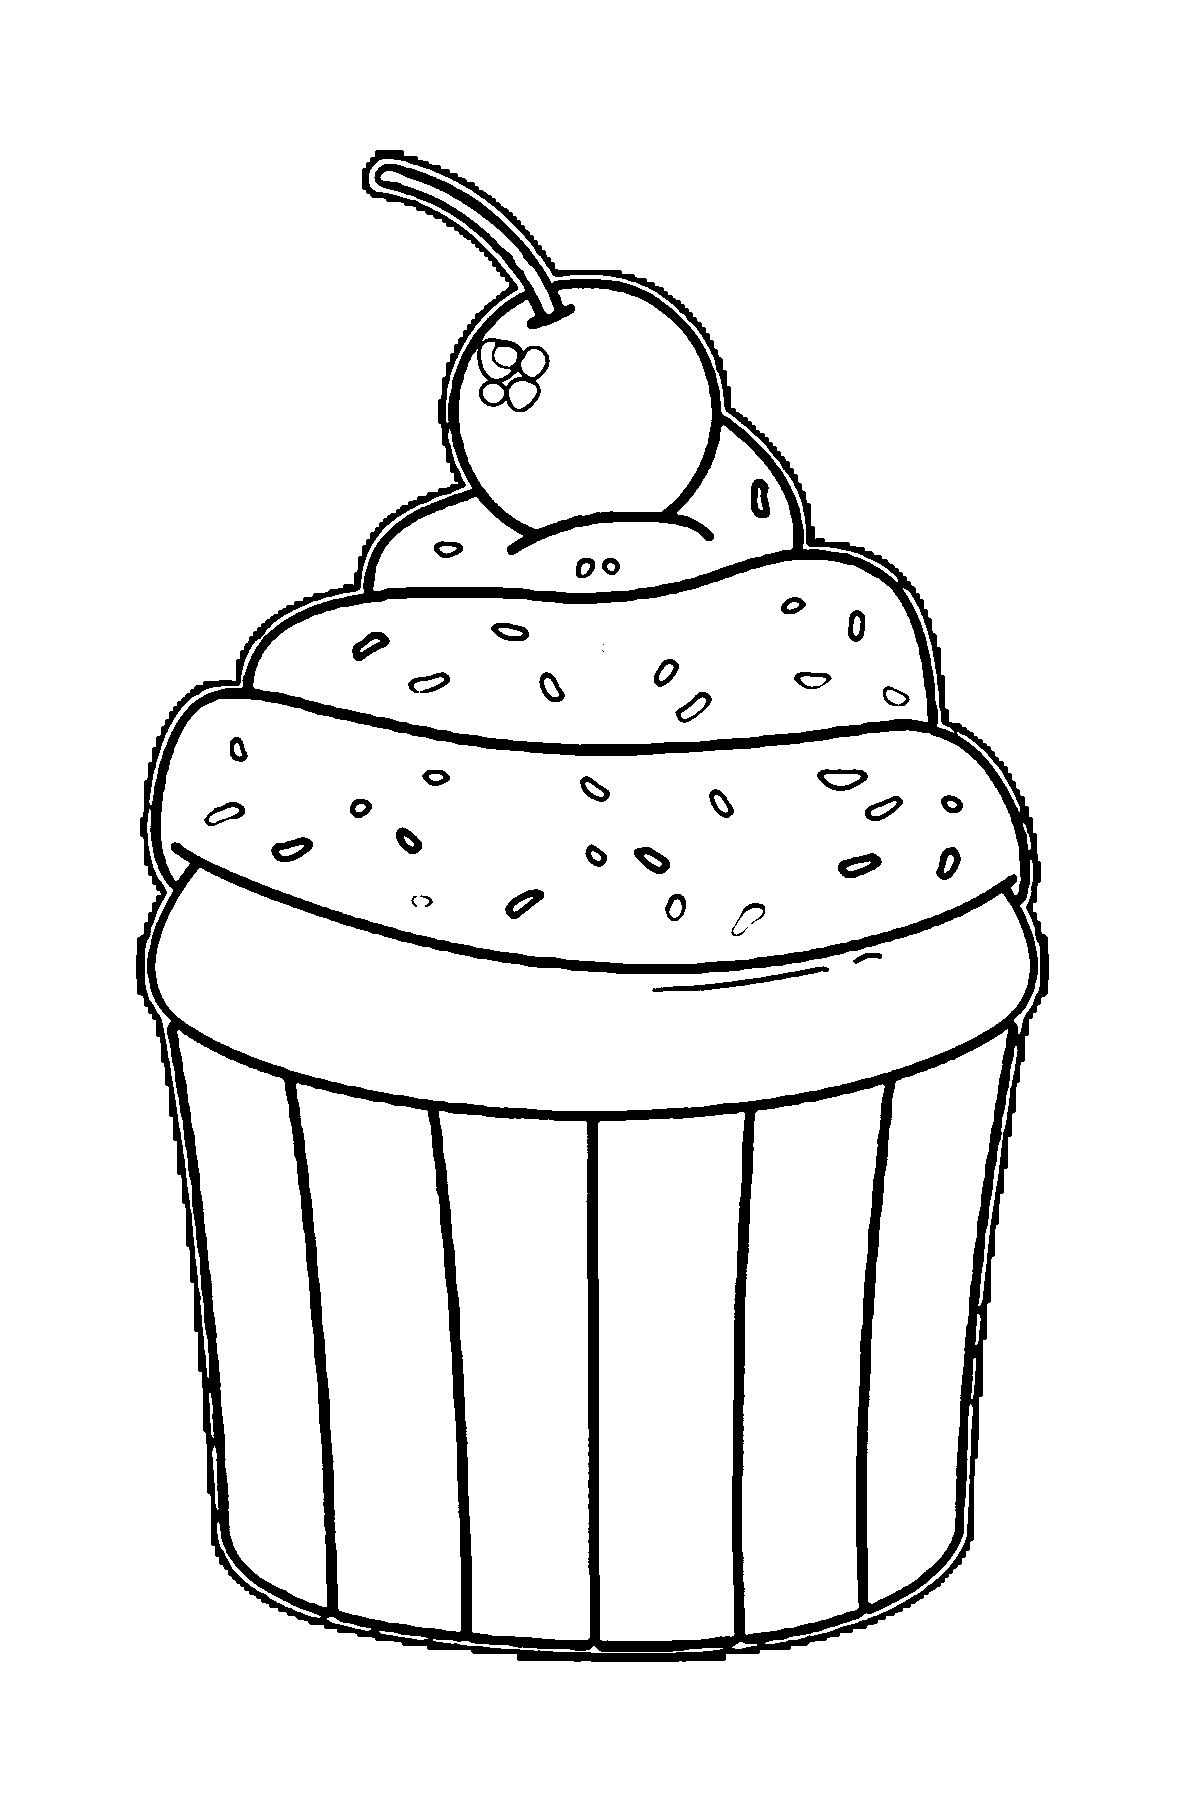 Cupcake Cup Cake Coloring Page 15 | Wecoloringpage